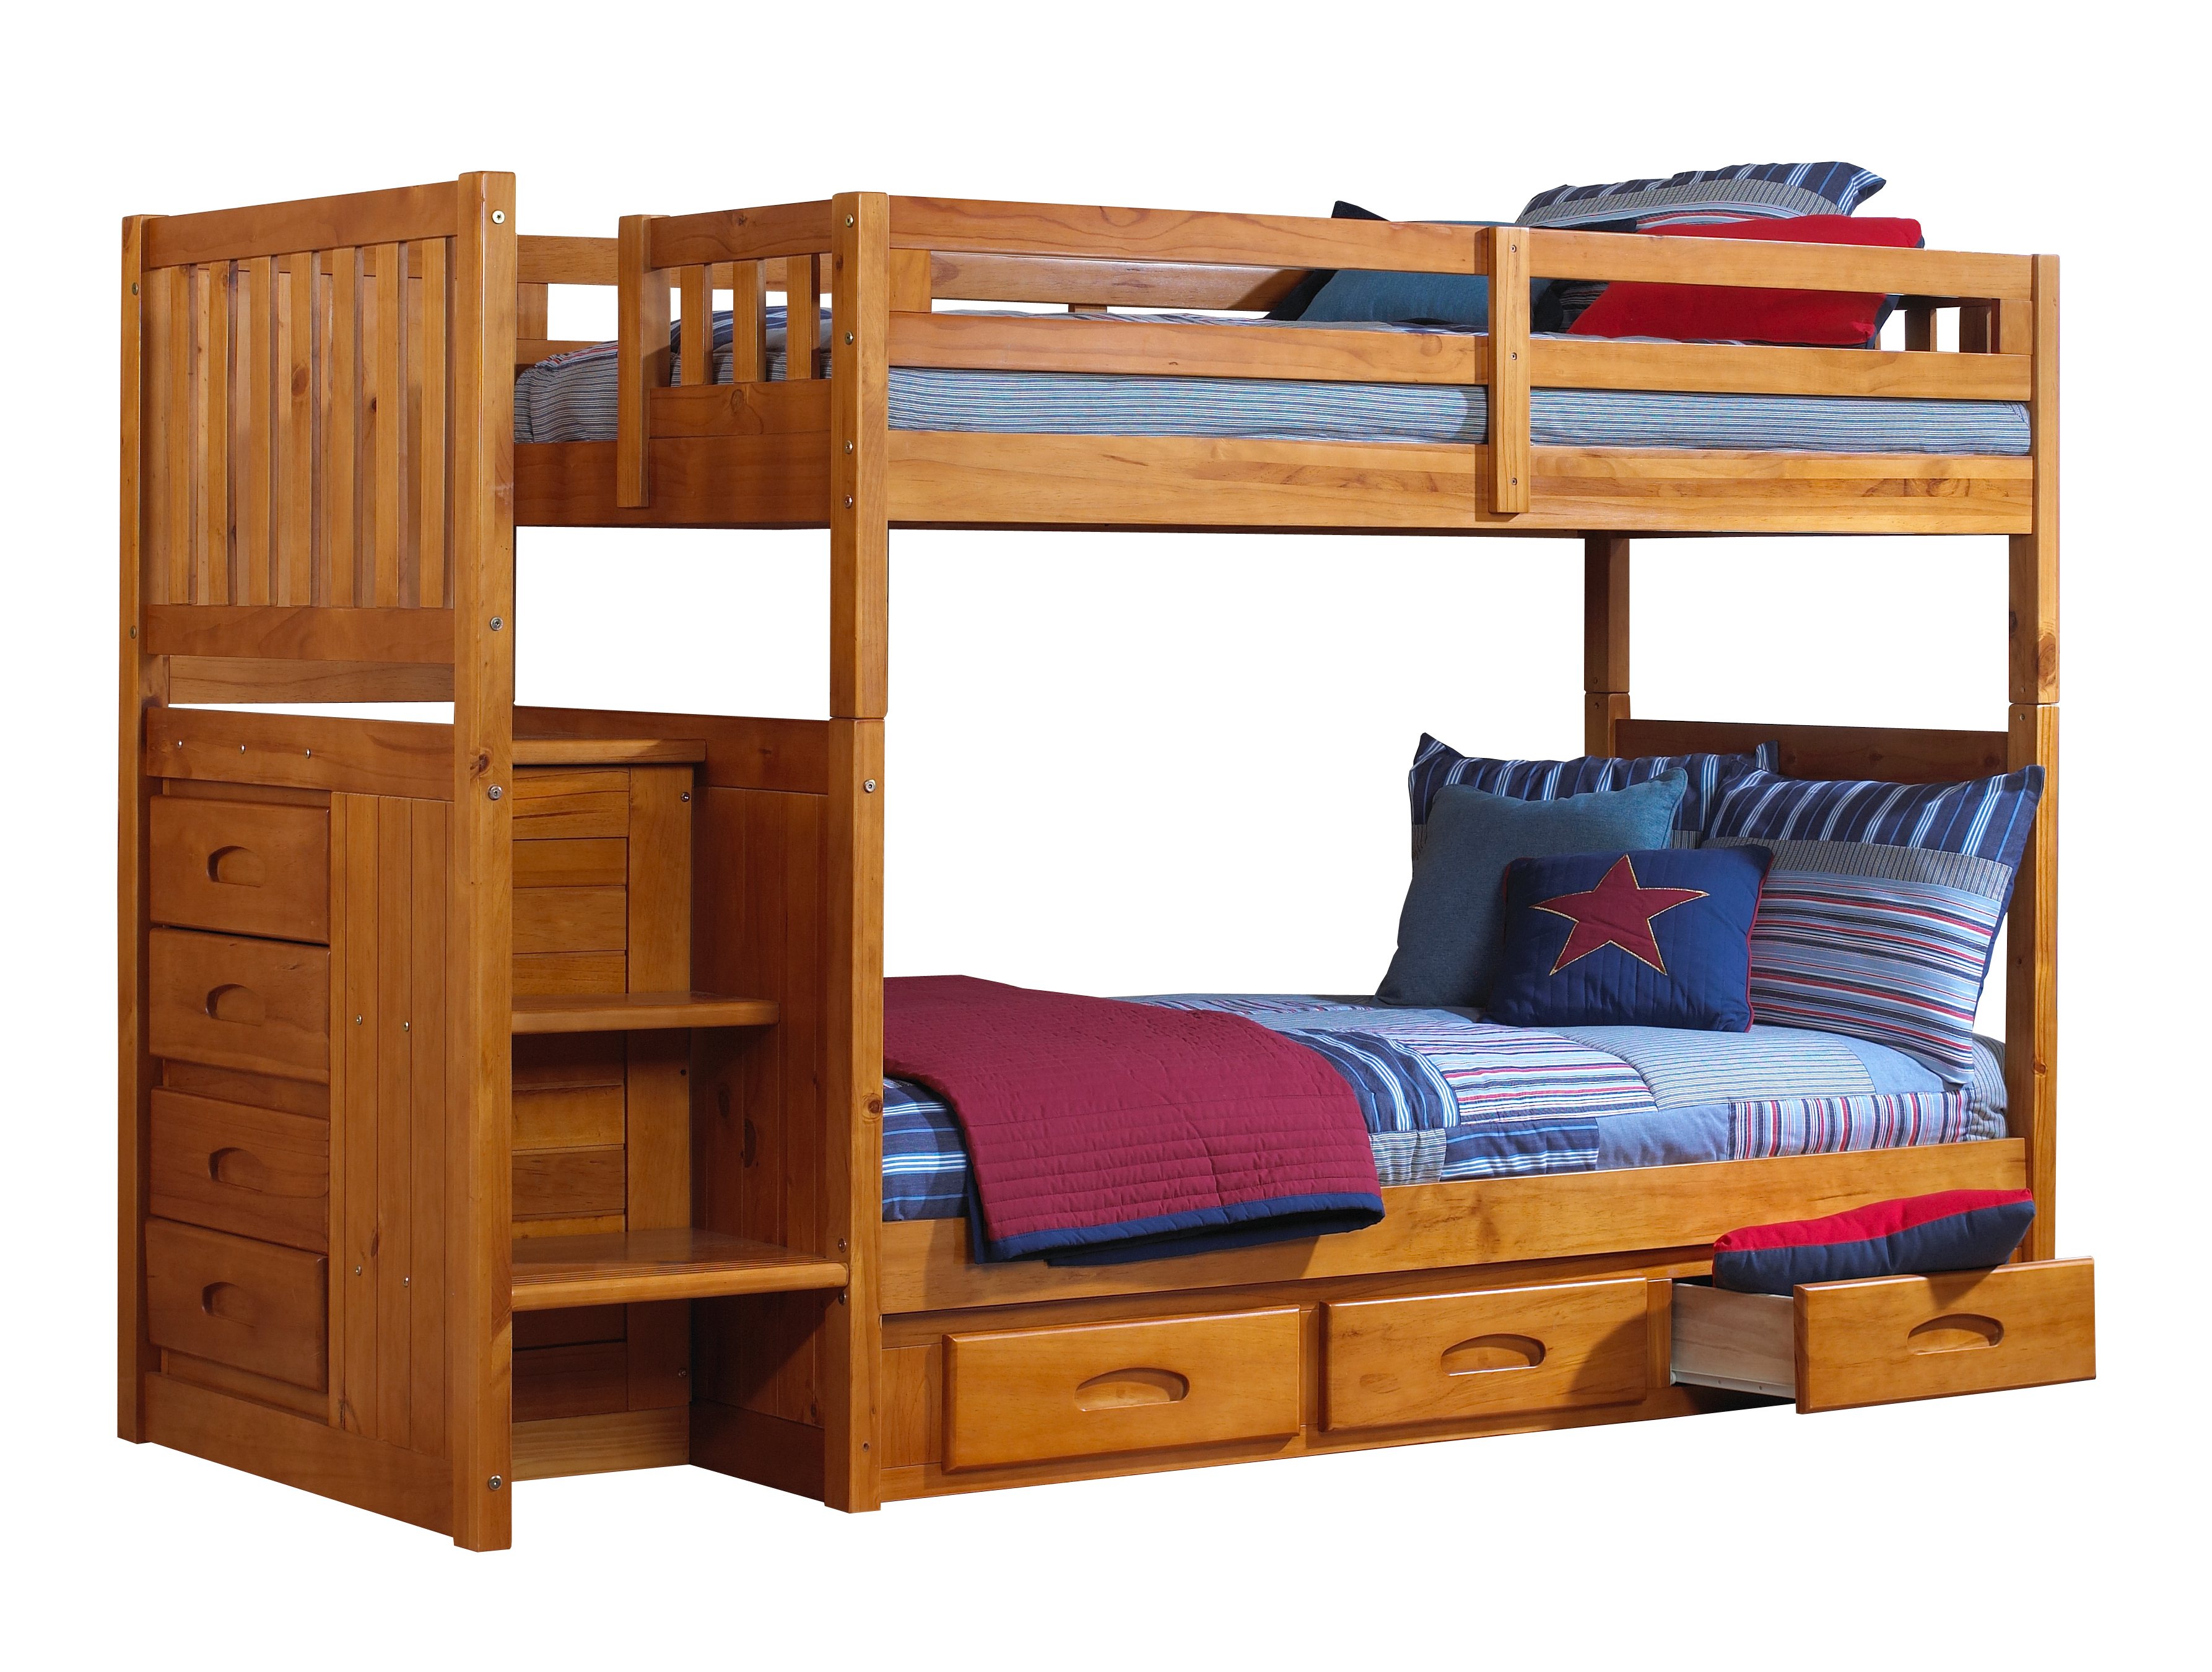 Twin Honey Mission Staircase Bunk Beds, Wood Bunk Bed With Stairs And Desk